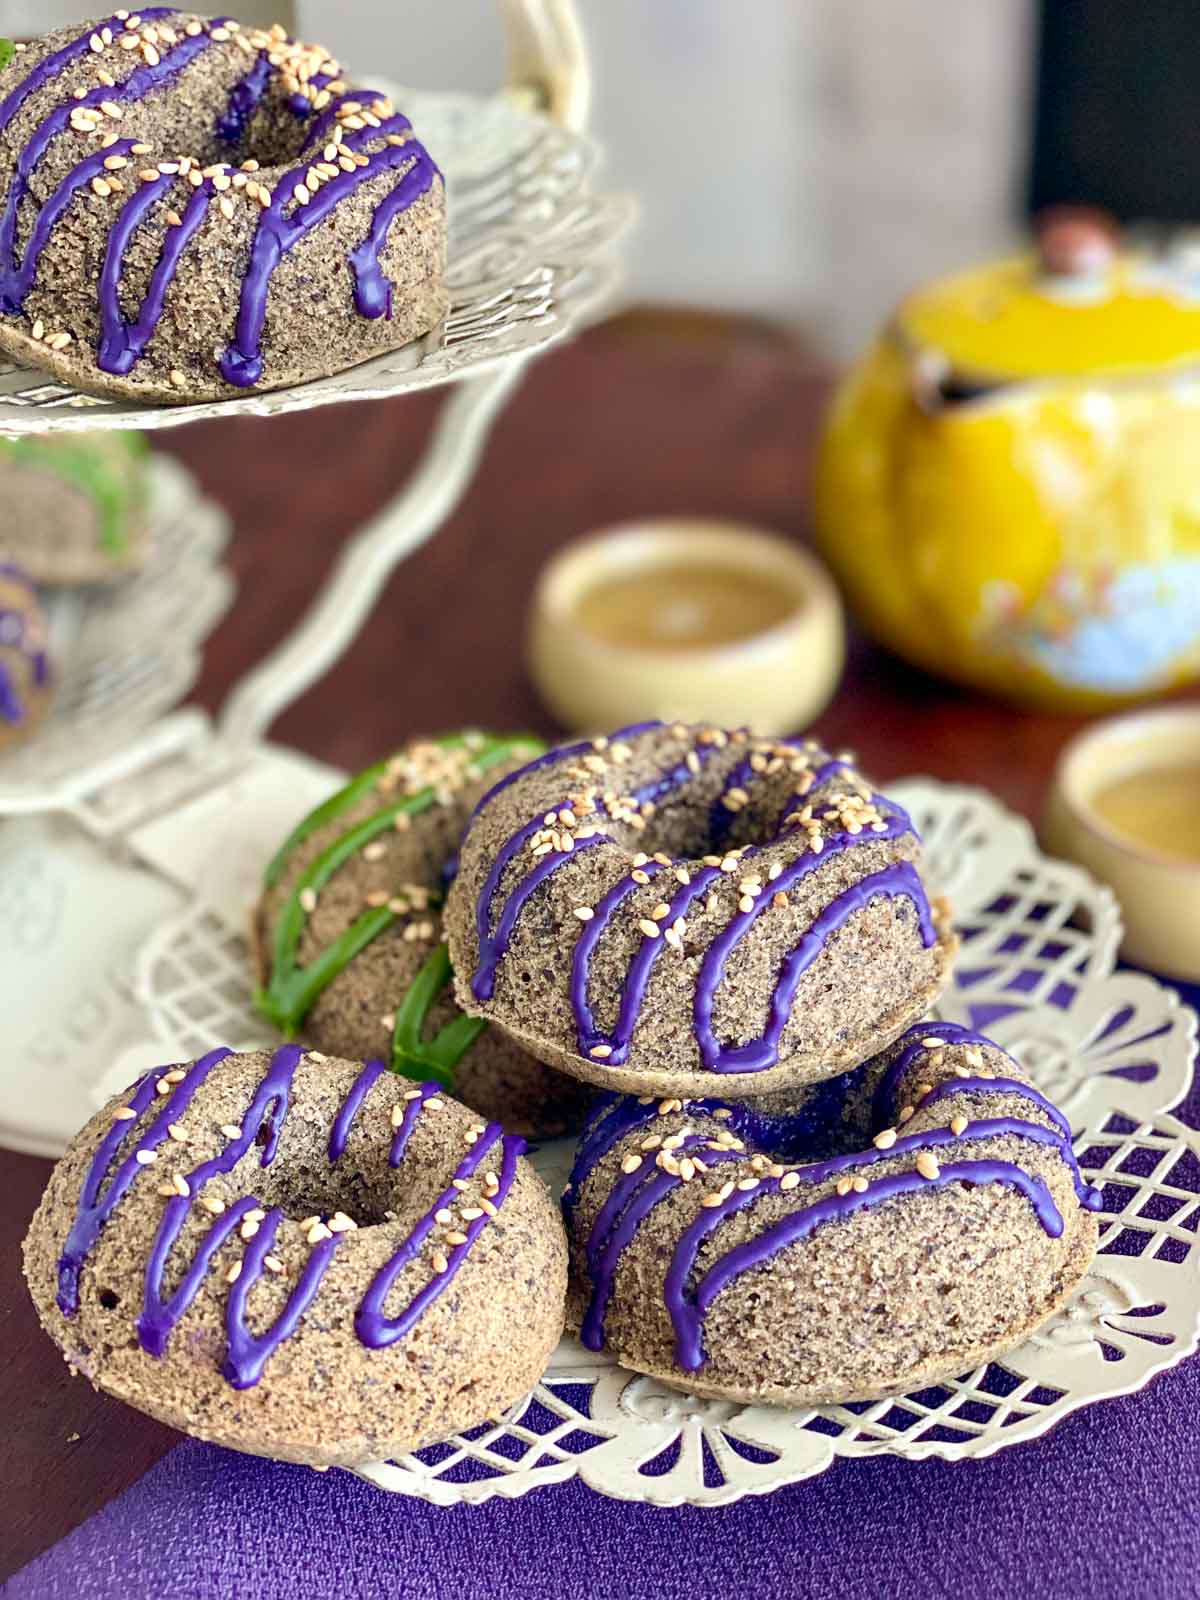 Teatime with black sesame mochi donuts and a yellow teapot. 